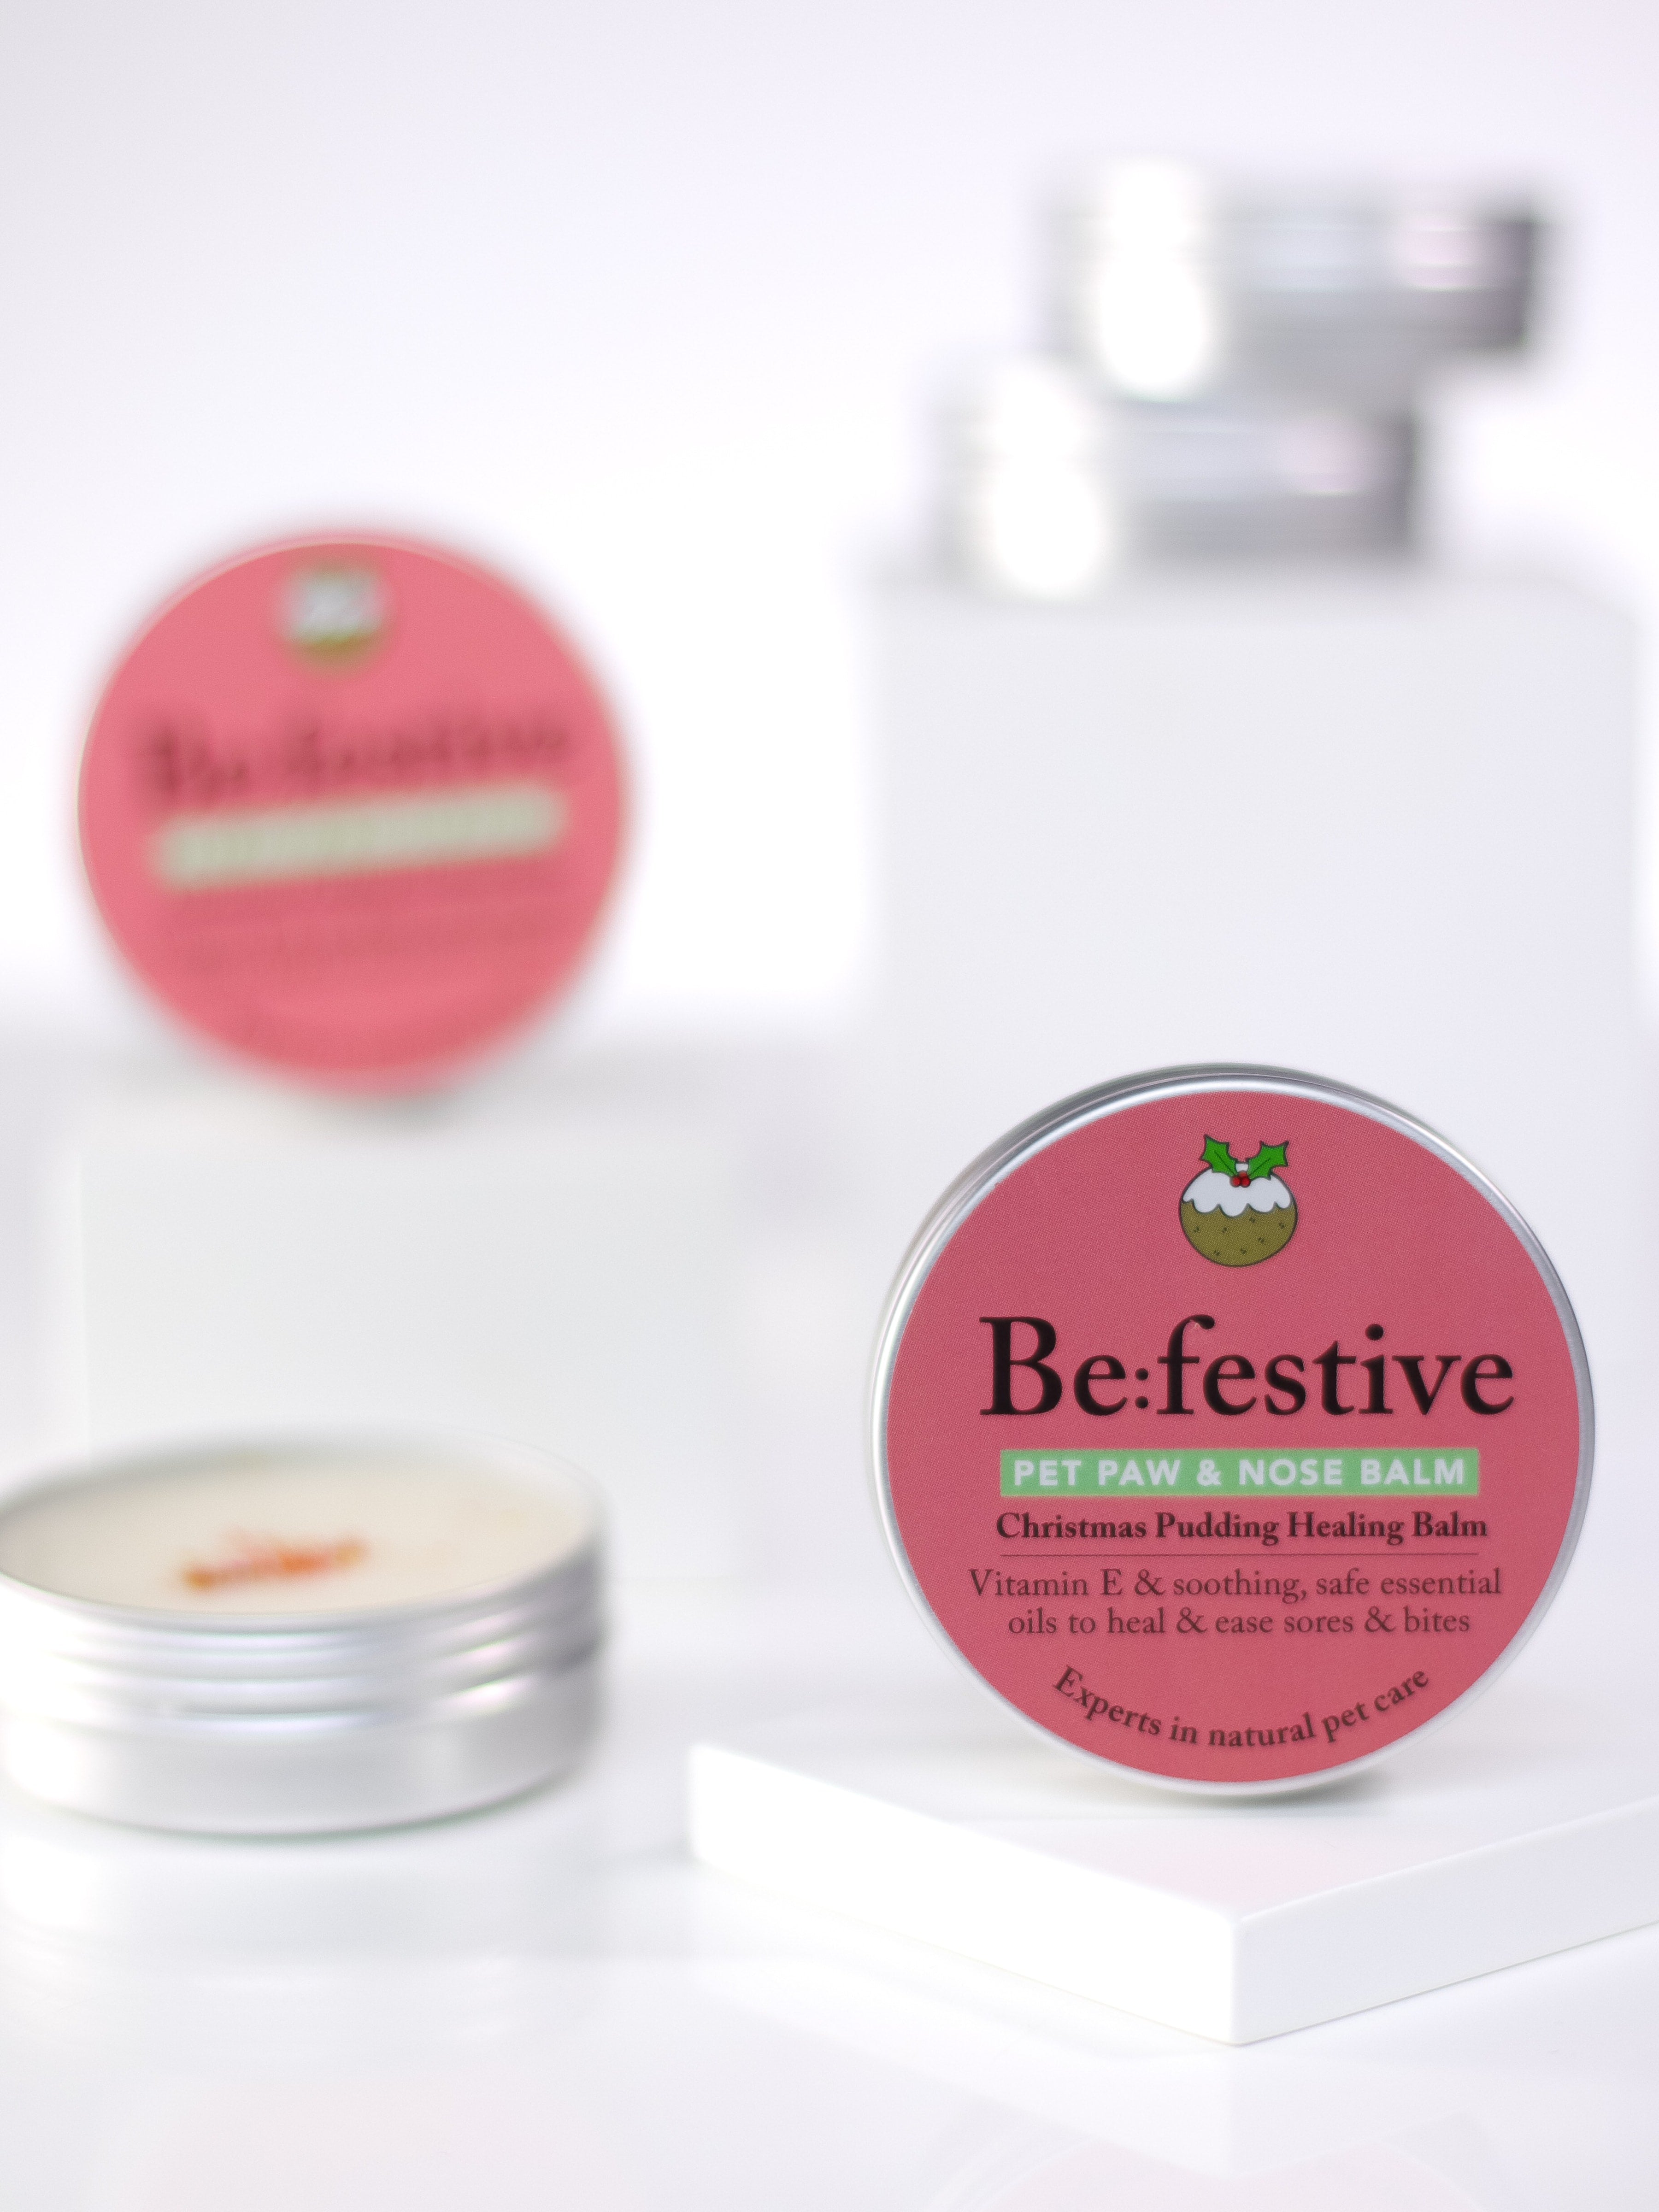 Be:Festive balm - one with the tin lid off and one with the lid on